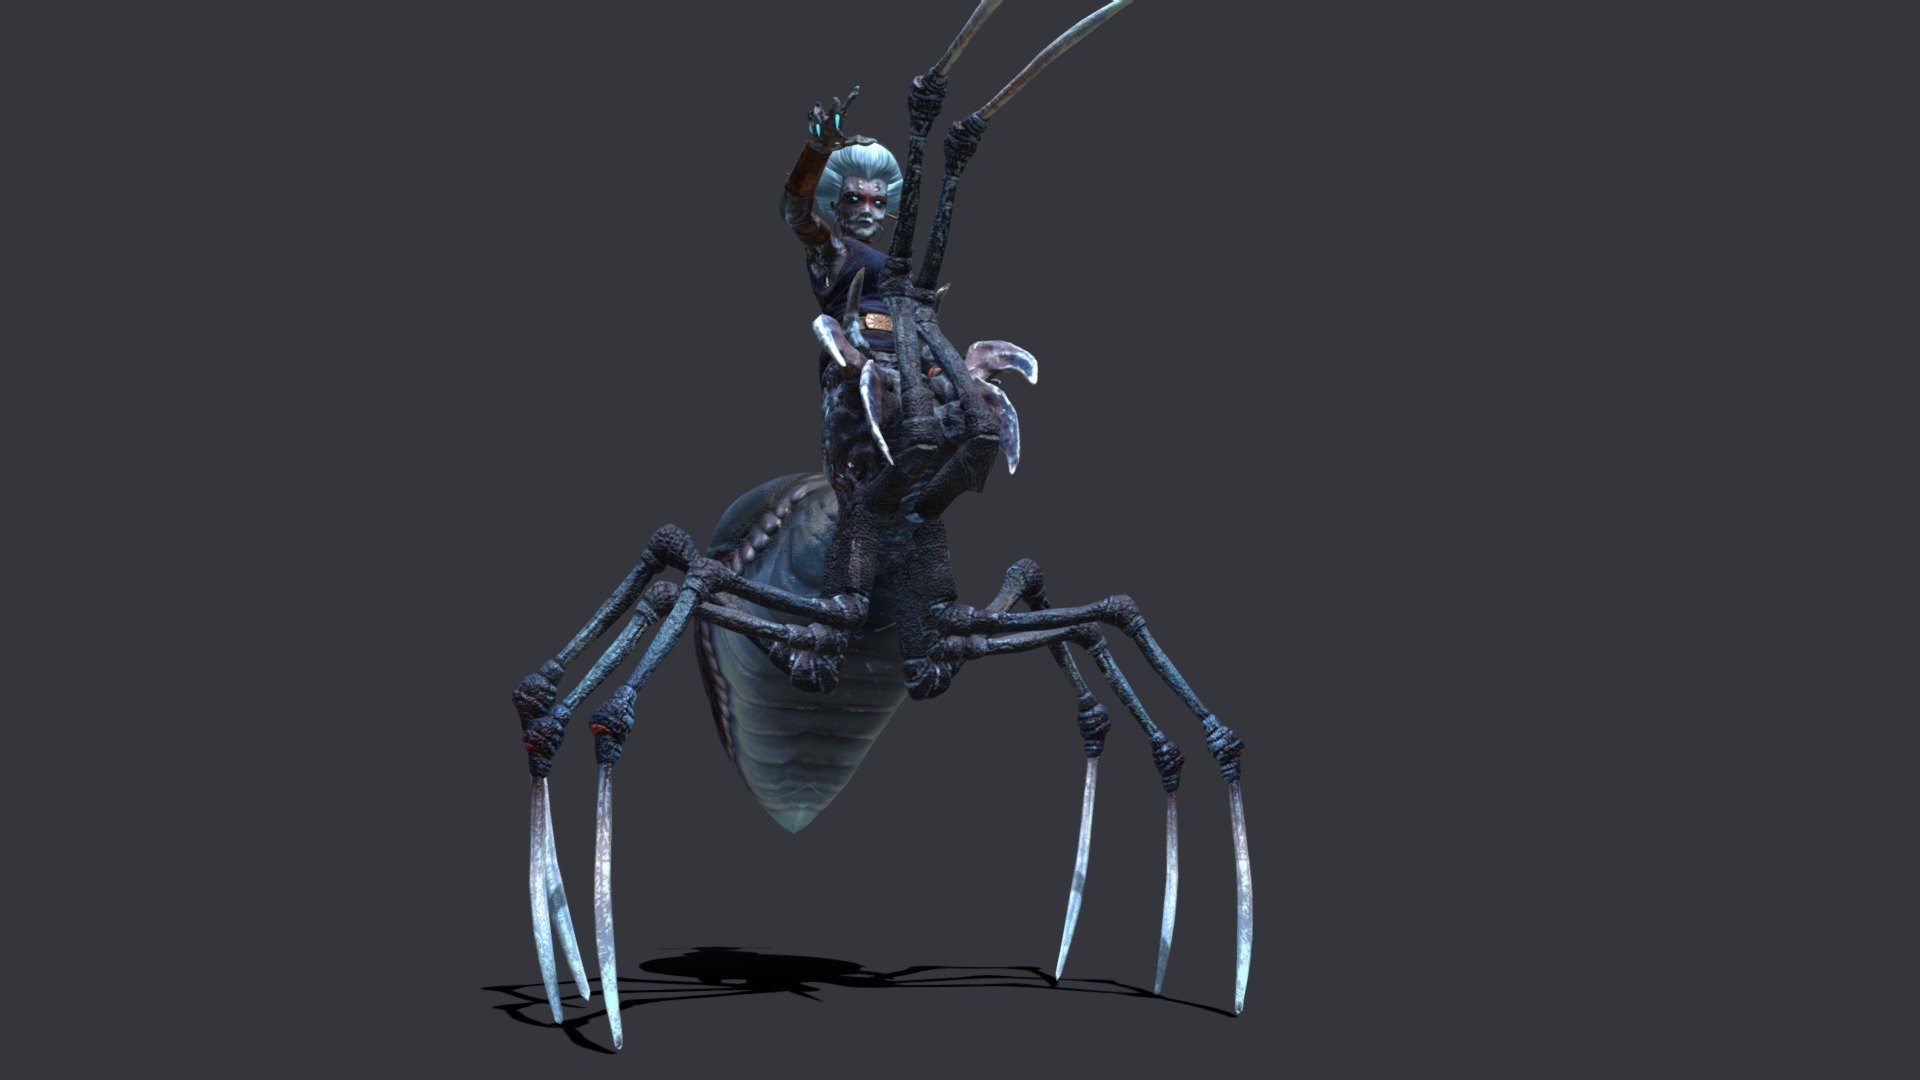 Some animations for Arachne! I just realized that animating spider legs is oddly satisfying.

Based on &ldquo;Arachne, Weaver of the Gods